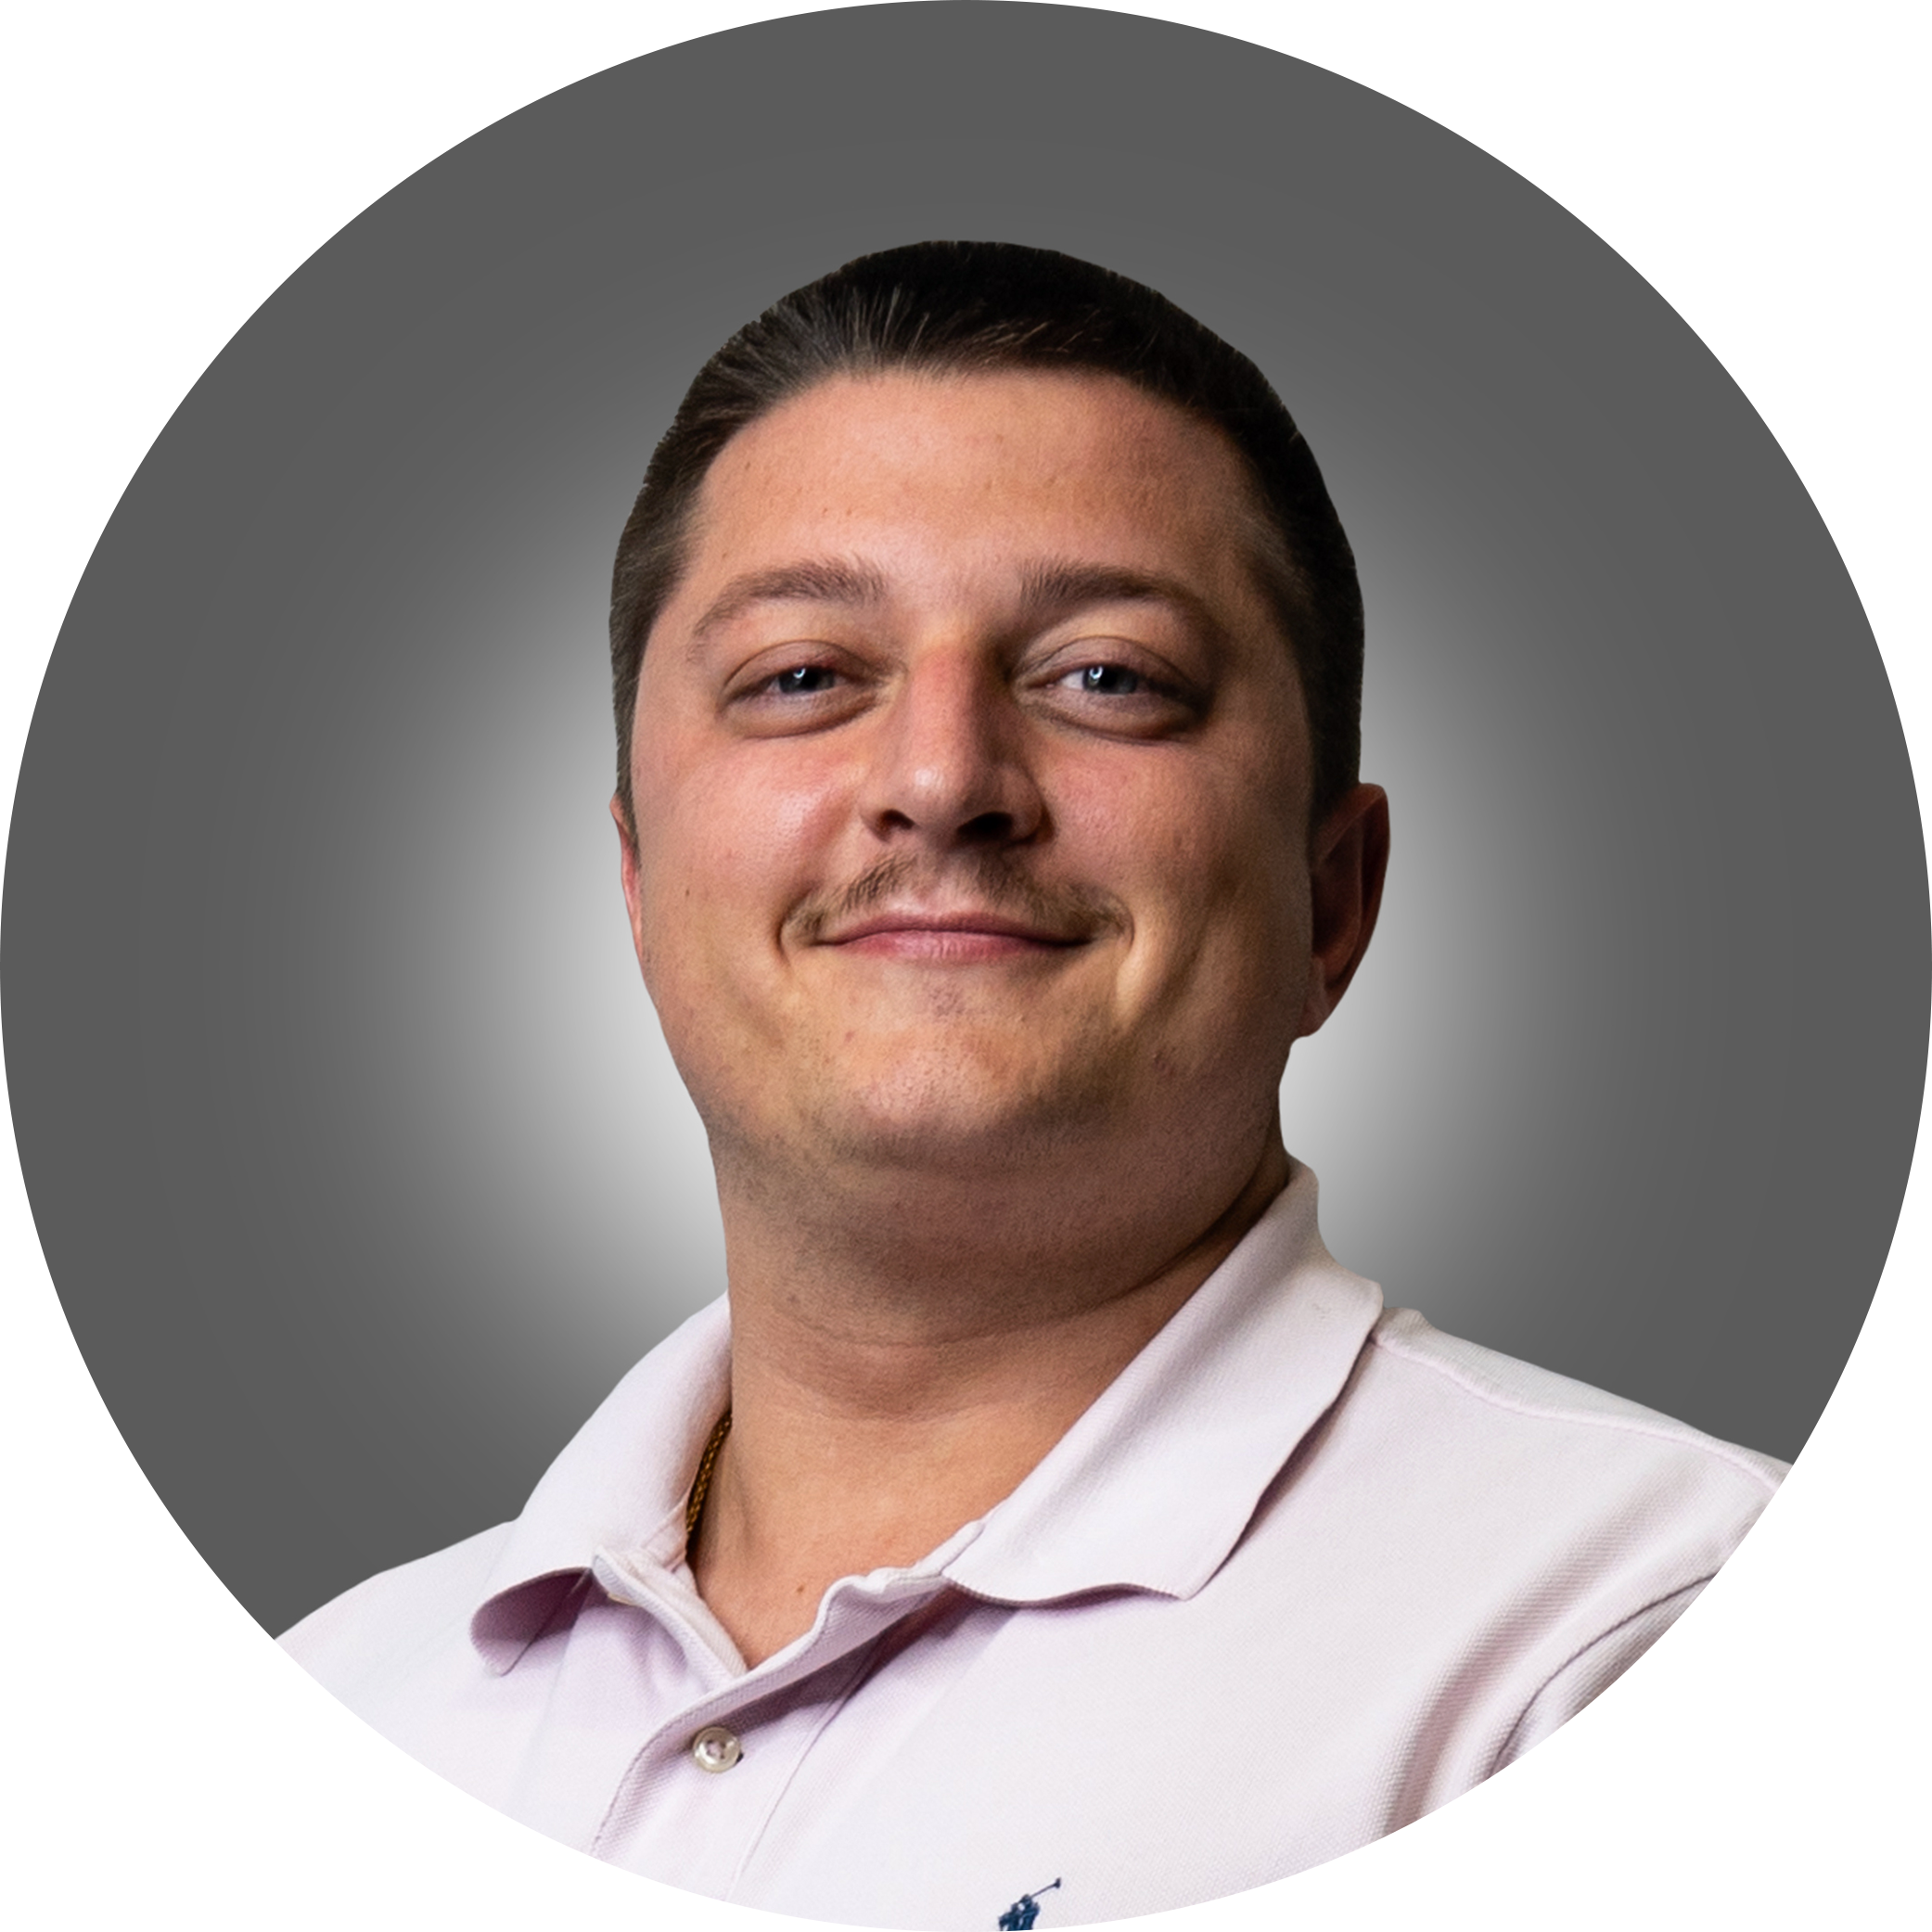 Jordan Mantello inside sales and estimator for general control systems